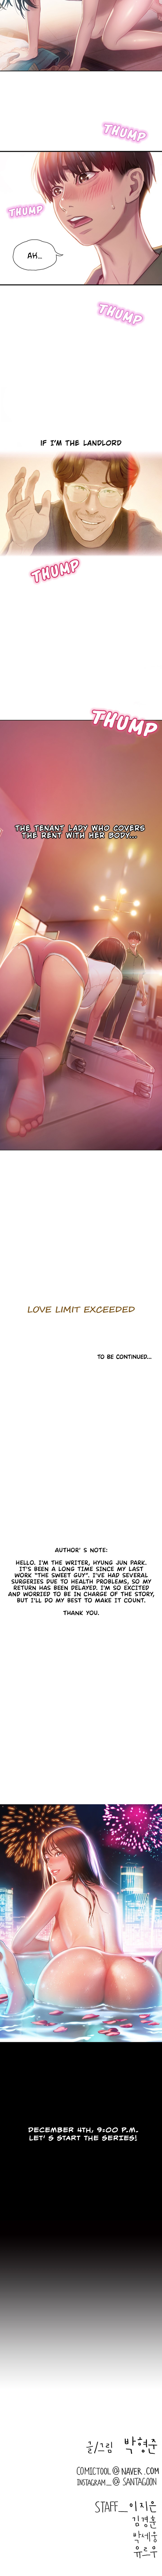 Love Limit Exceeded - Chapter 1 Page 10